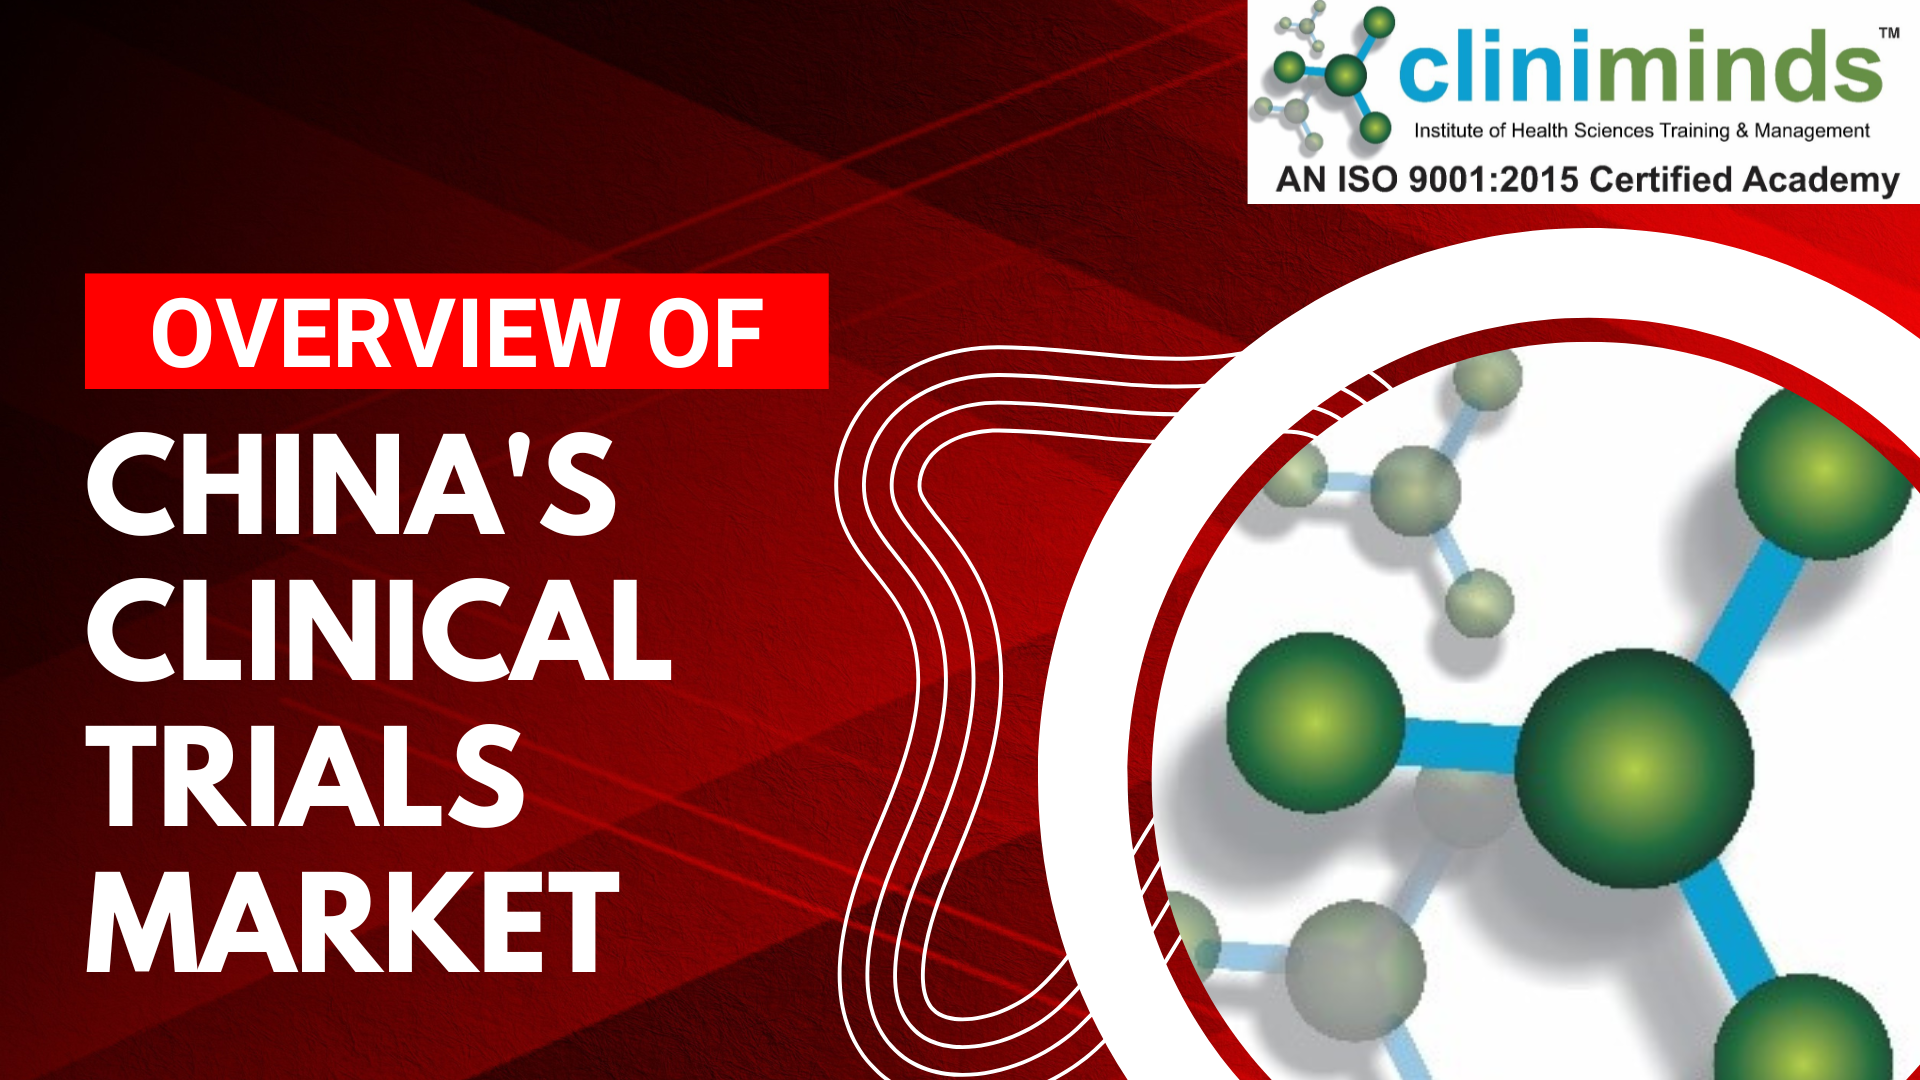 Overview of China's Clinical Trials Market